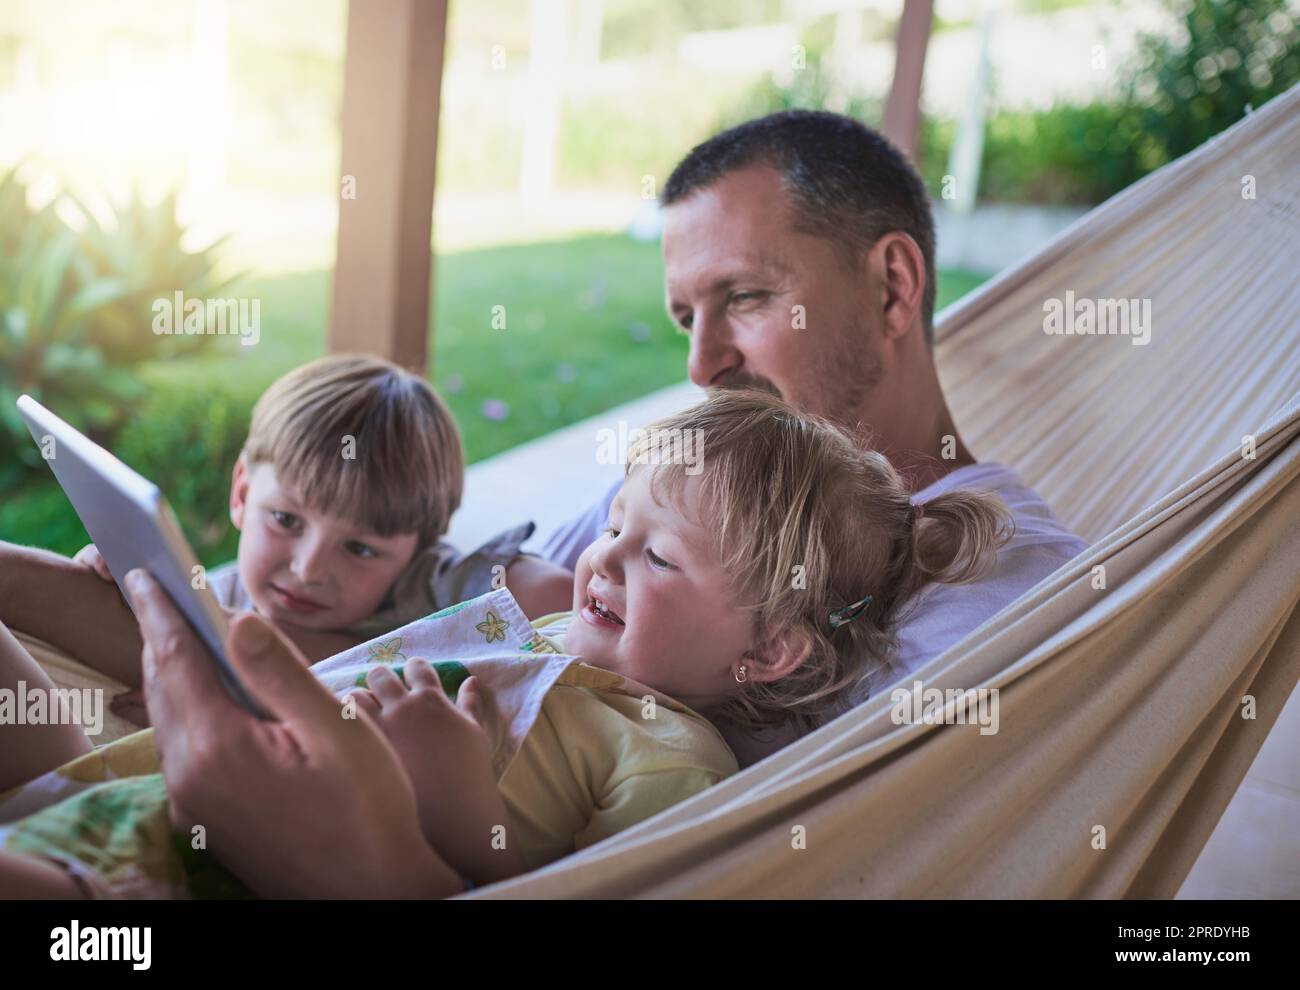 Dads always willing to watch cartoons with his kids. a father and his two little children using a digital tablet while relaxing on a hammock outdoors. Stock Photo